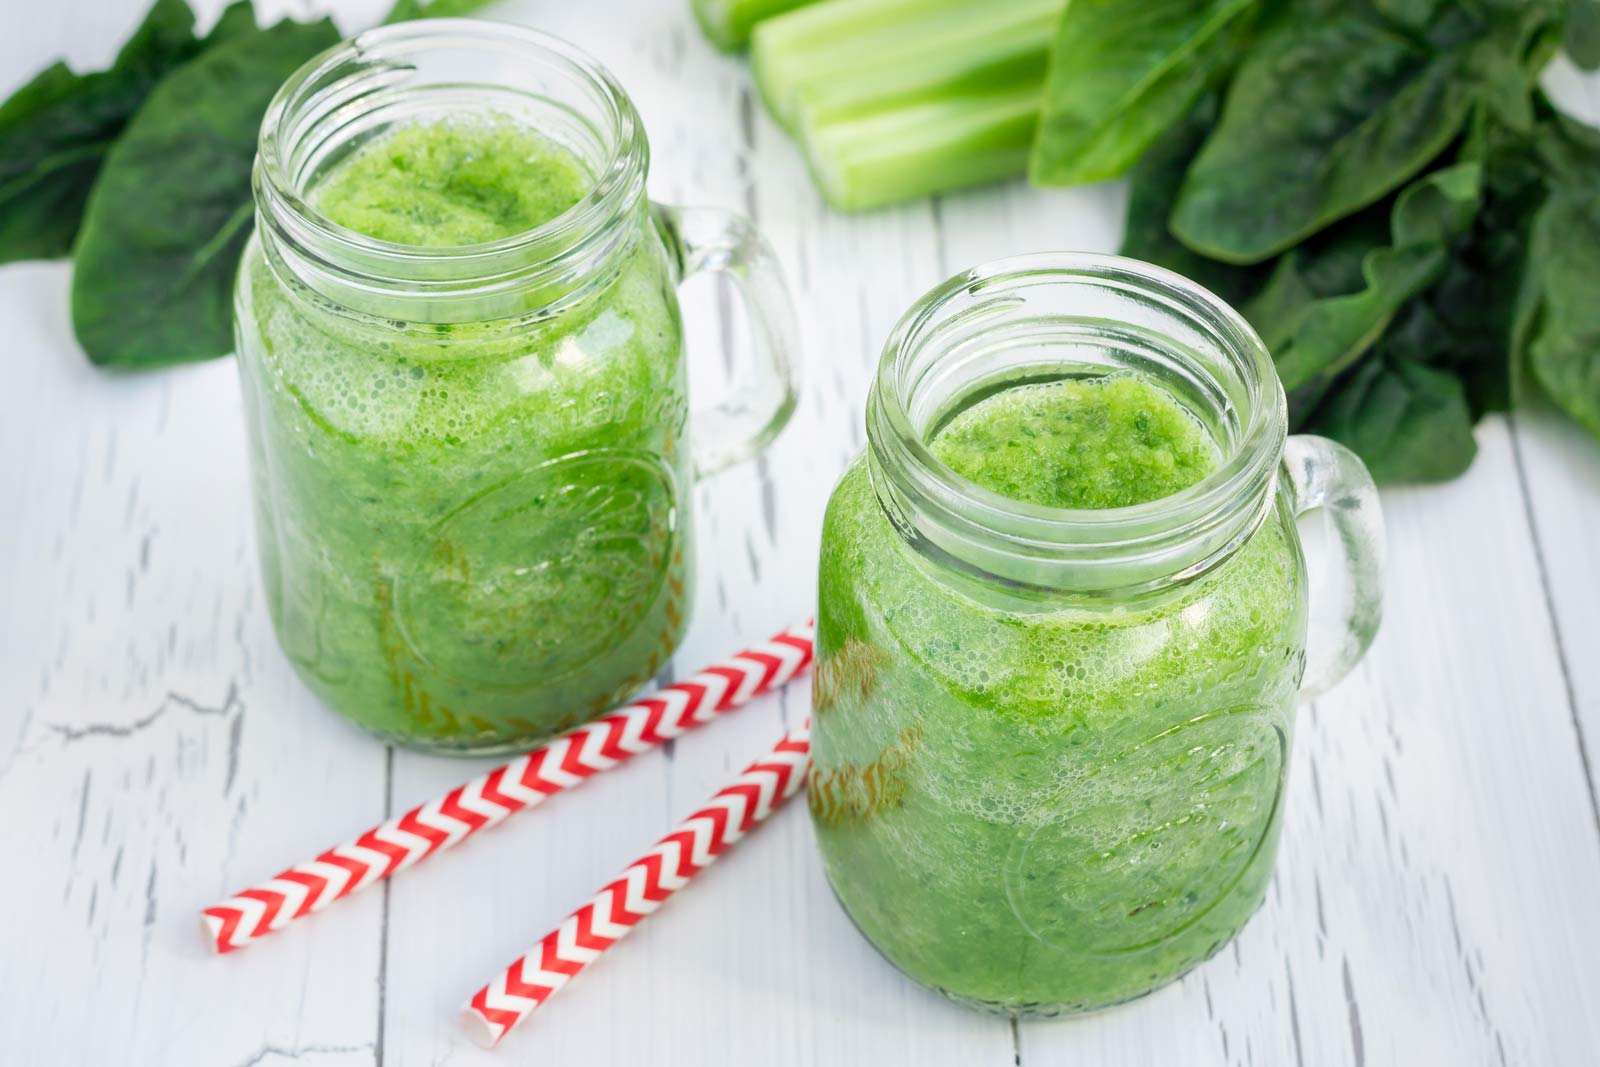 Spinach and Cucumber Smoothie